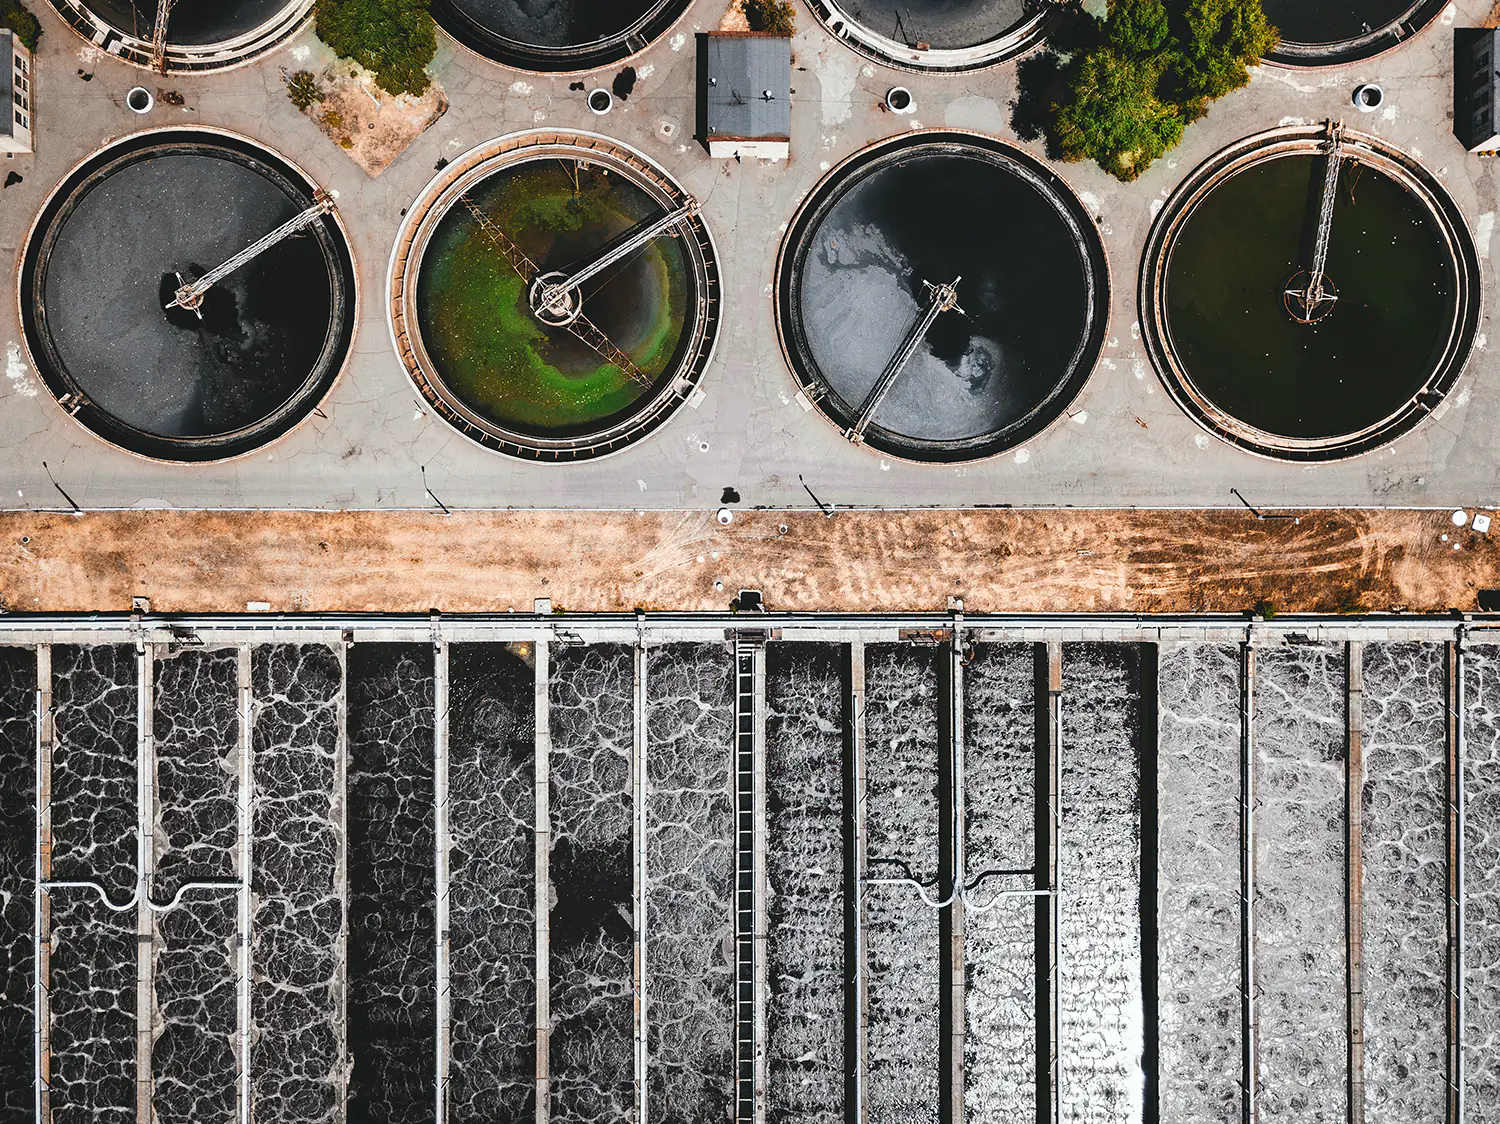 Water Treatment Plant Drone Photo